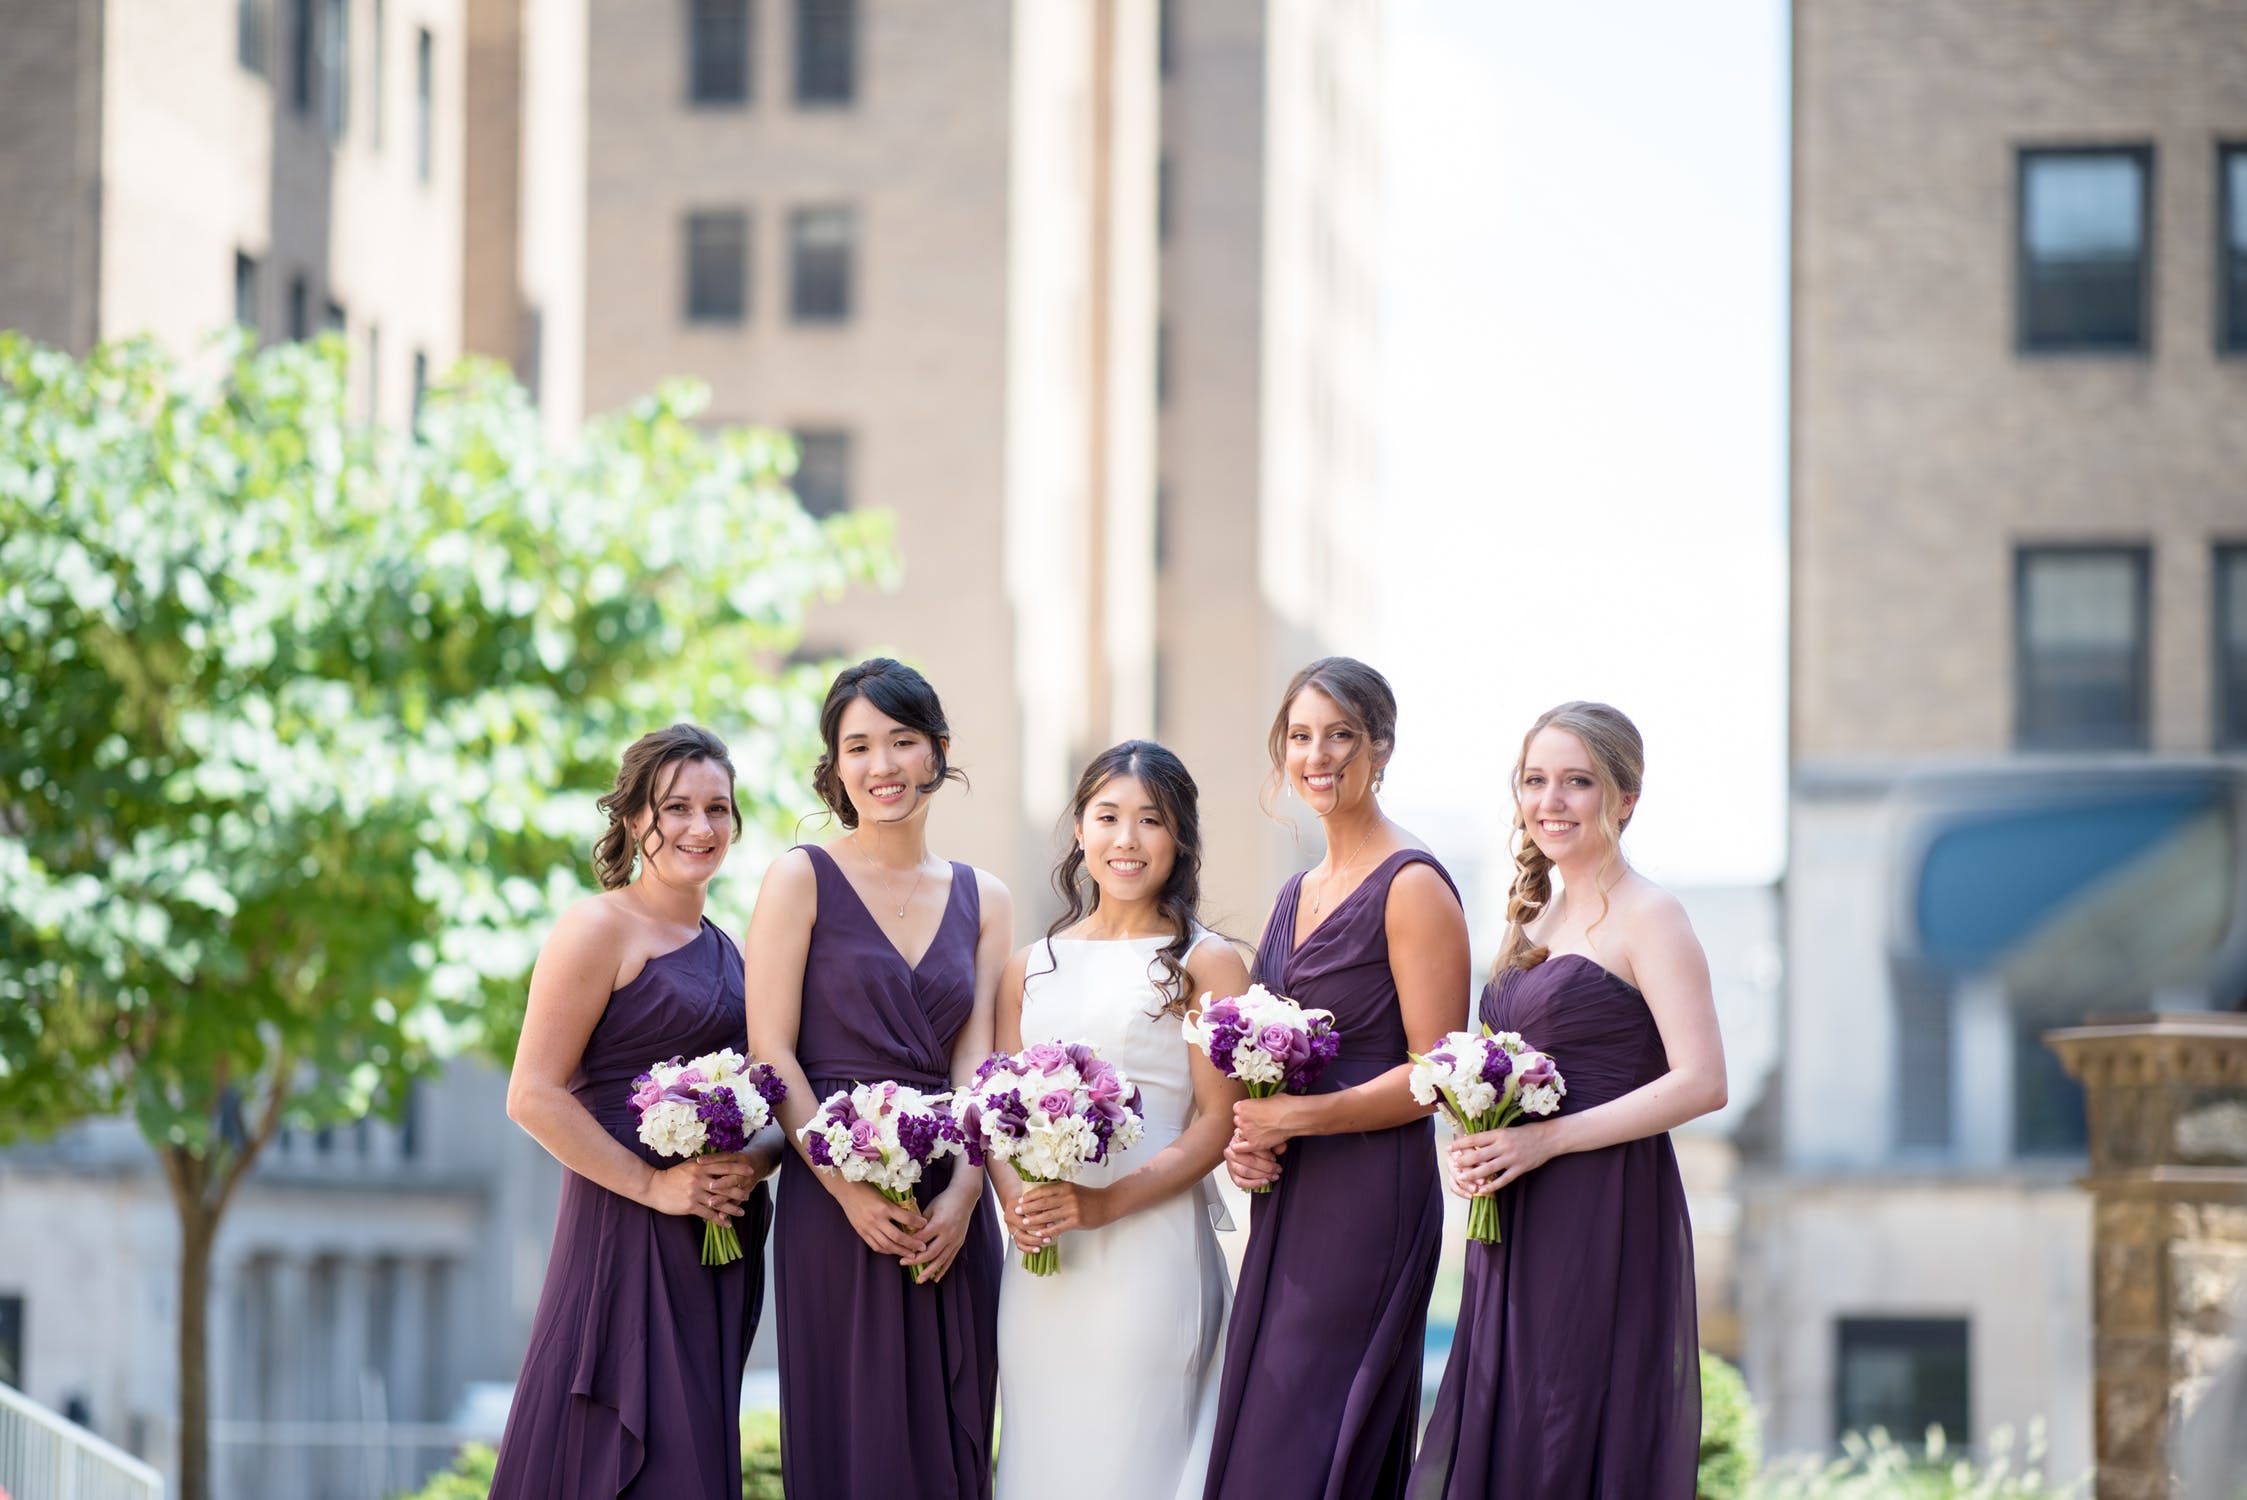 Dressing your besties: Choosing the perfect bridesmaid’s dresses for your girls